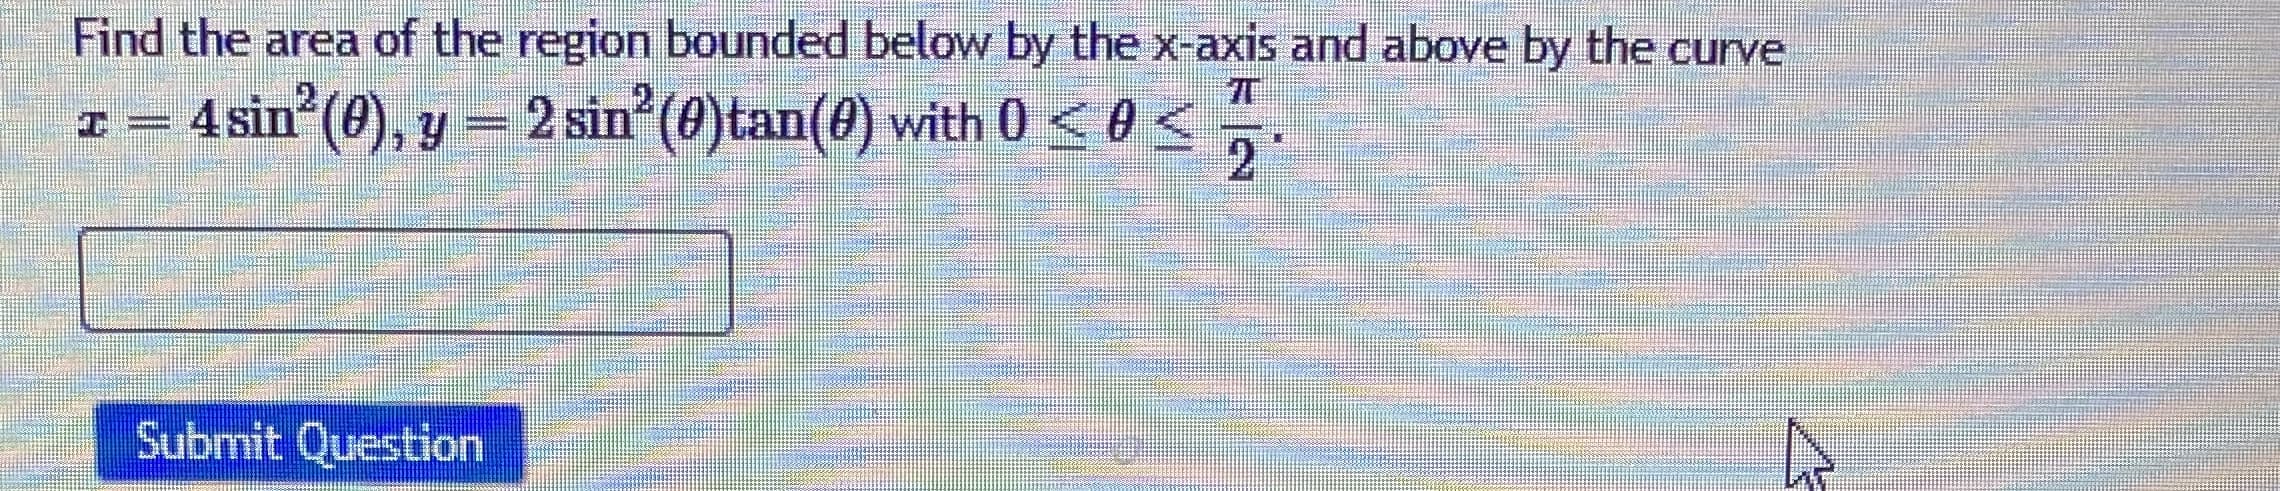 Find the area of the region bounded below by the x-axis and above by the curve
x = 4sin (0), y = 2 sin (0)tan(0) with 0 < 0 <
wwww
